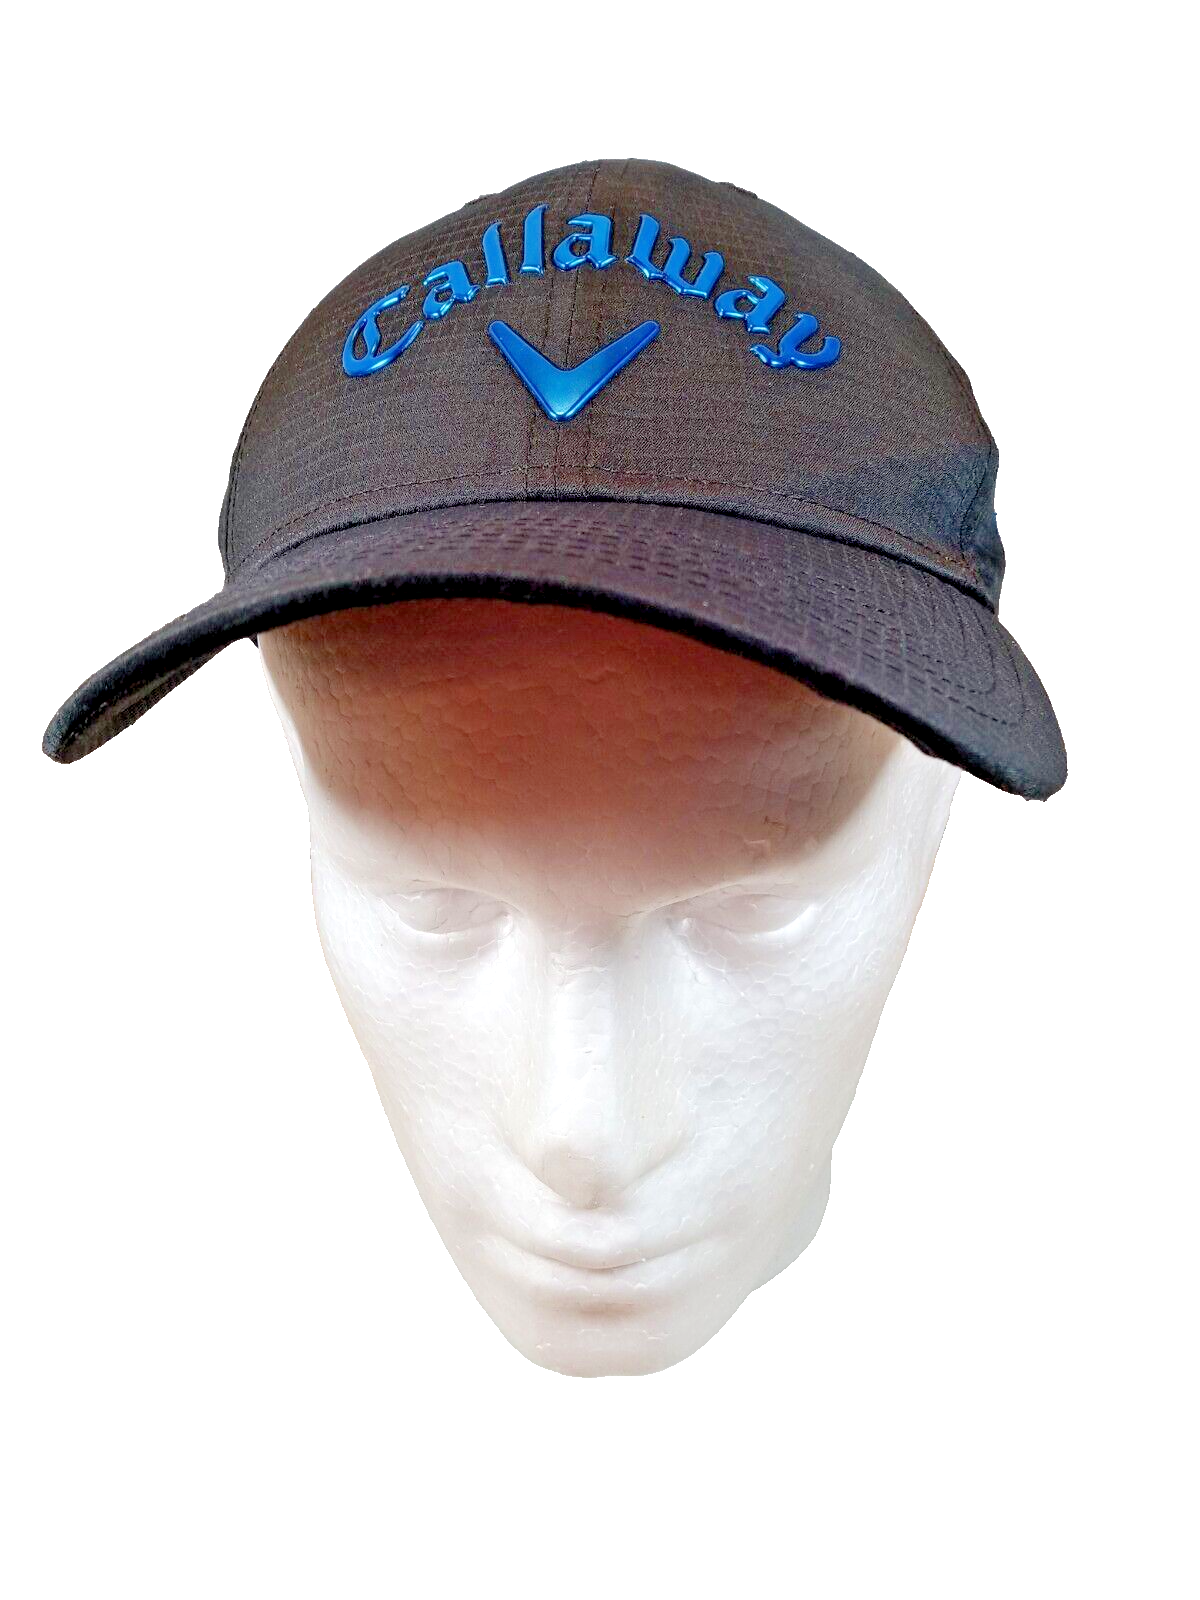 Callaway Golf Hat With Blue Lettering Adjustable-Callaway Staff Invitational - $16.99